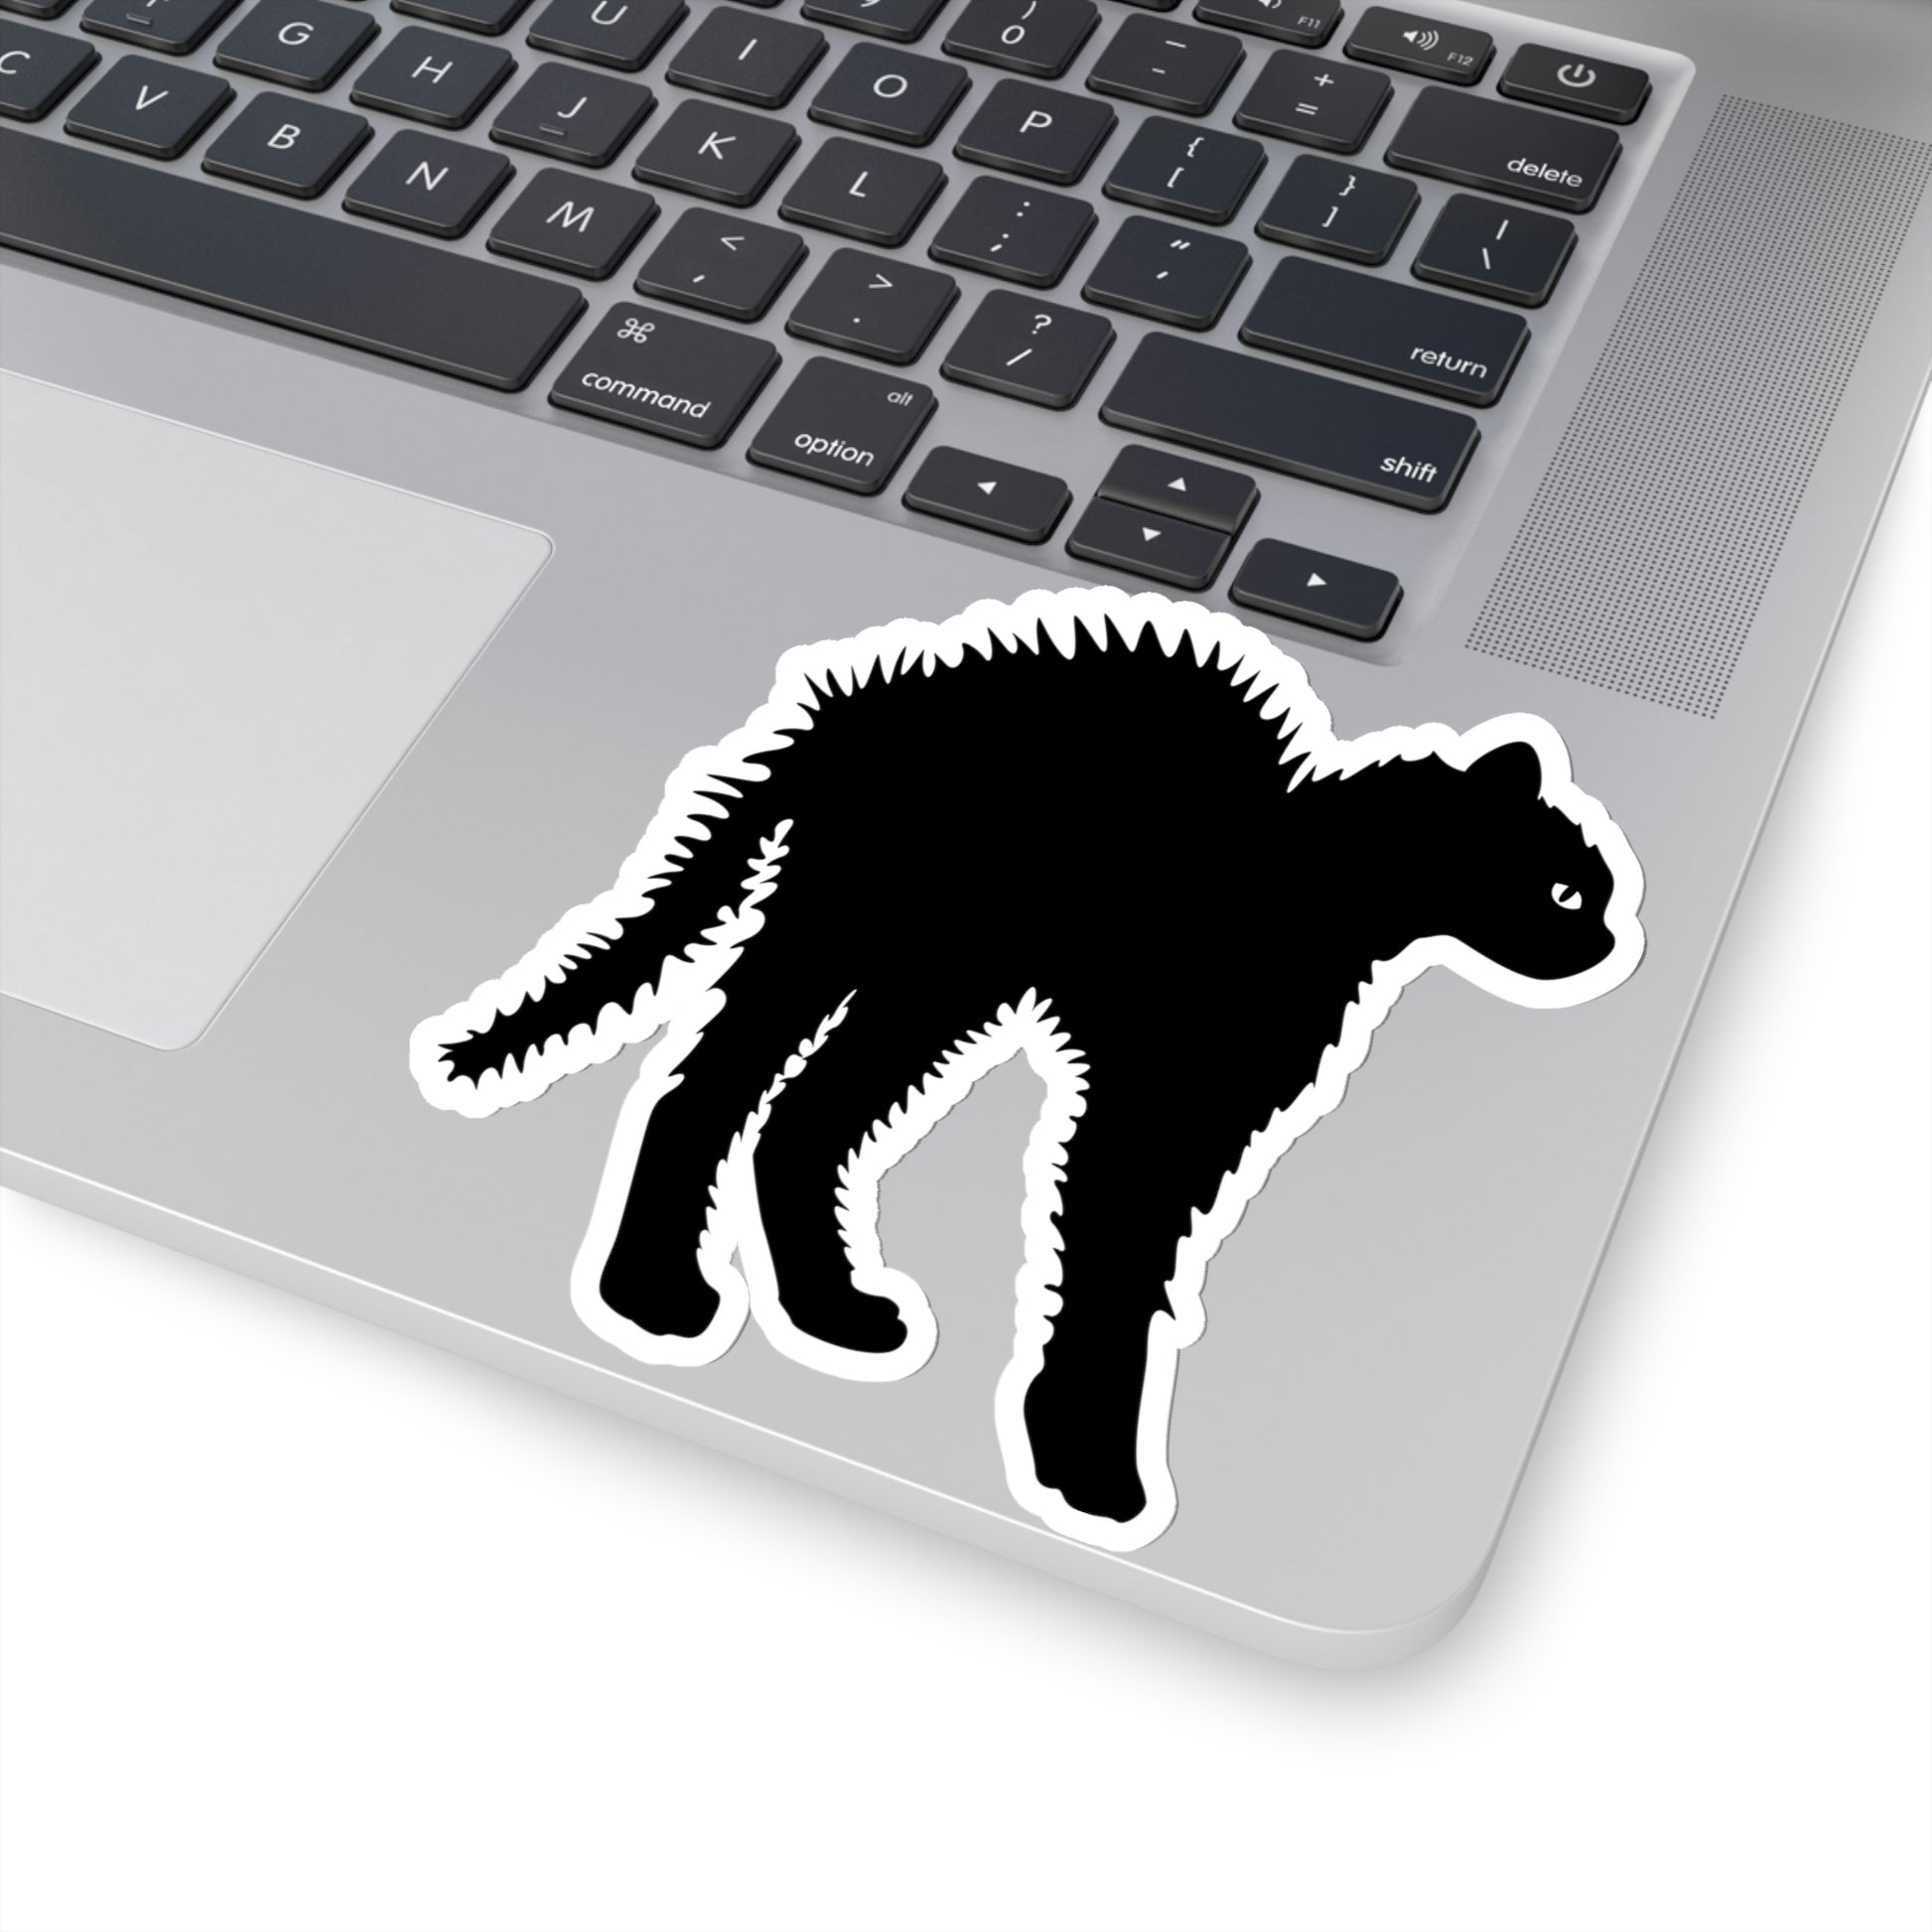 Cat Paw Prints Decal In Black for KitchenAid Mixer - Classic Cool Artistic  - also for MacBook, Laptop, Car, or Anything